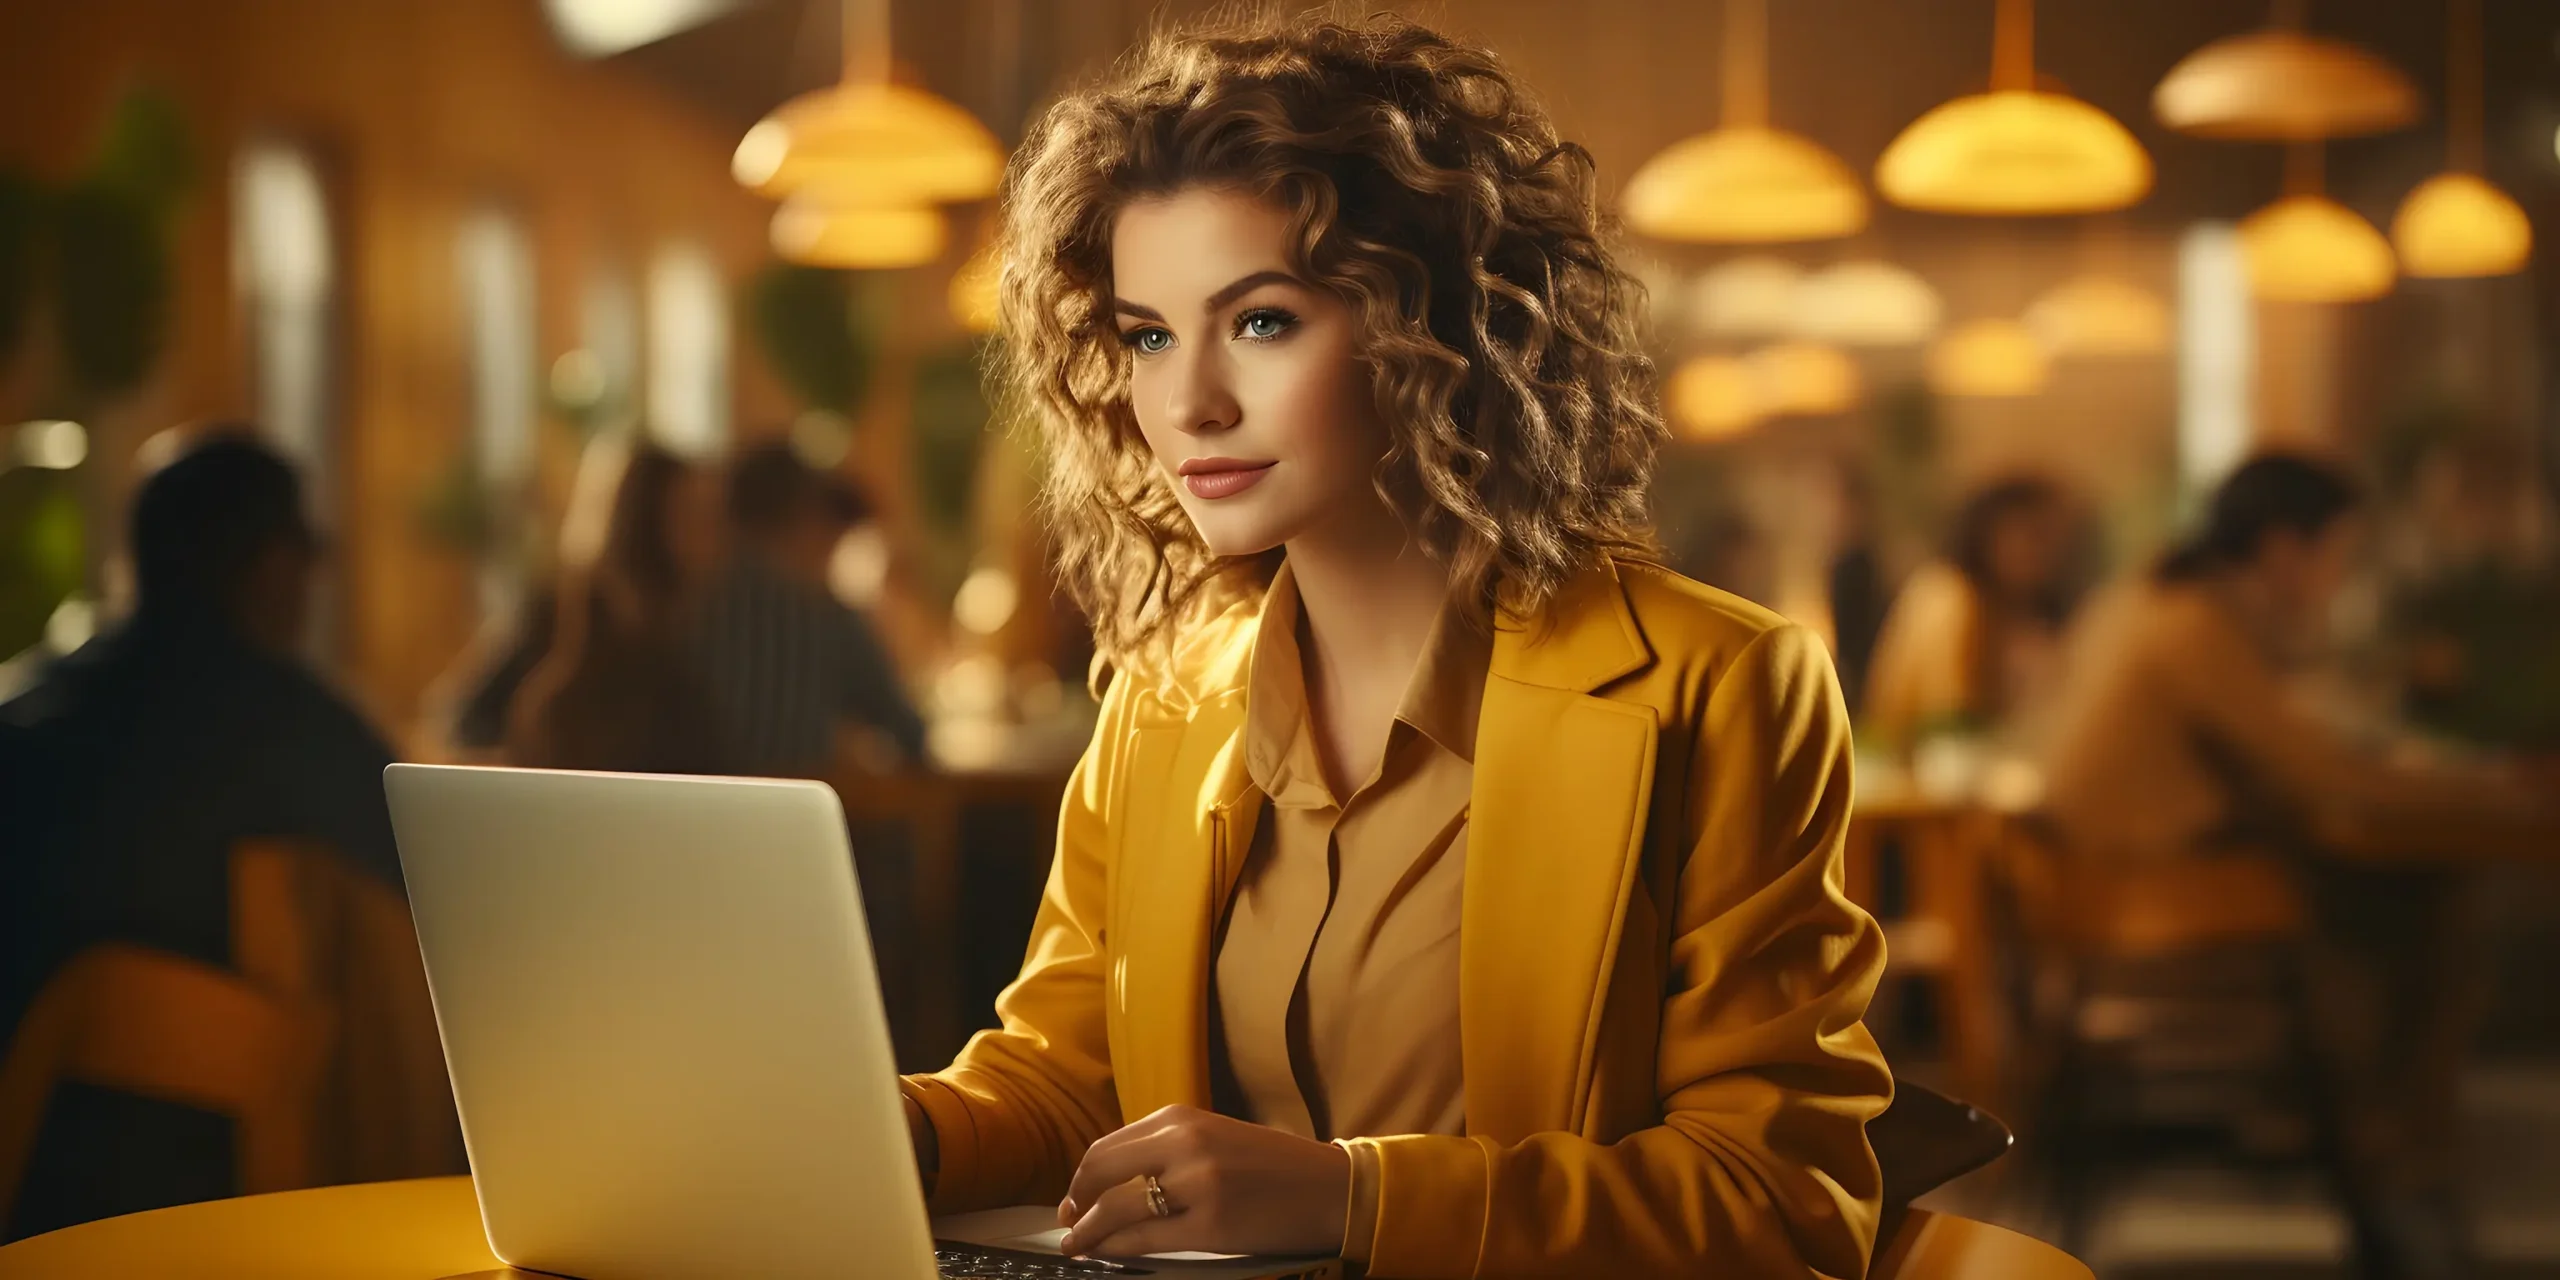 young stylish female with curly hair using laptop computer marketing agency